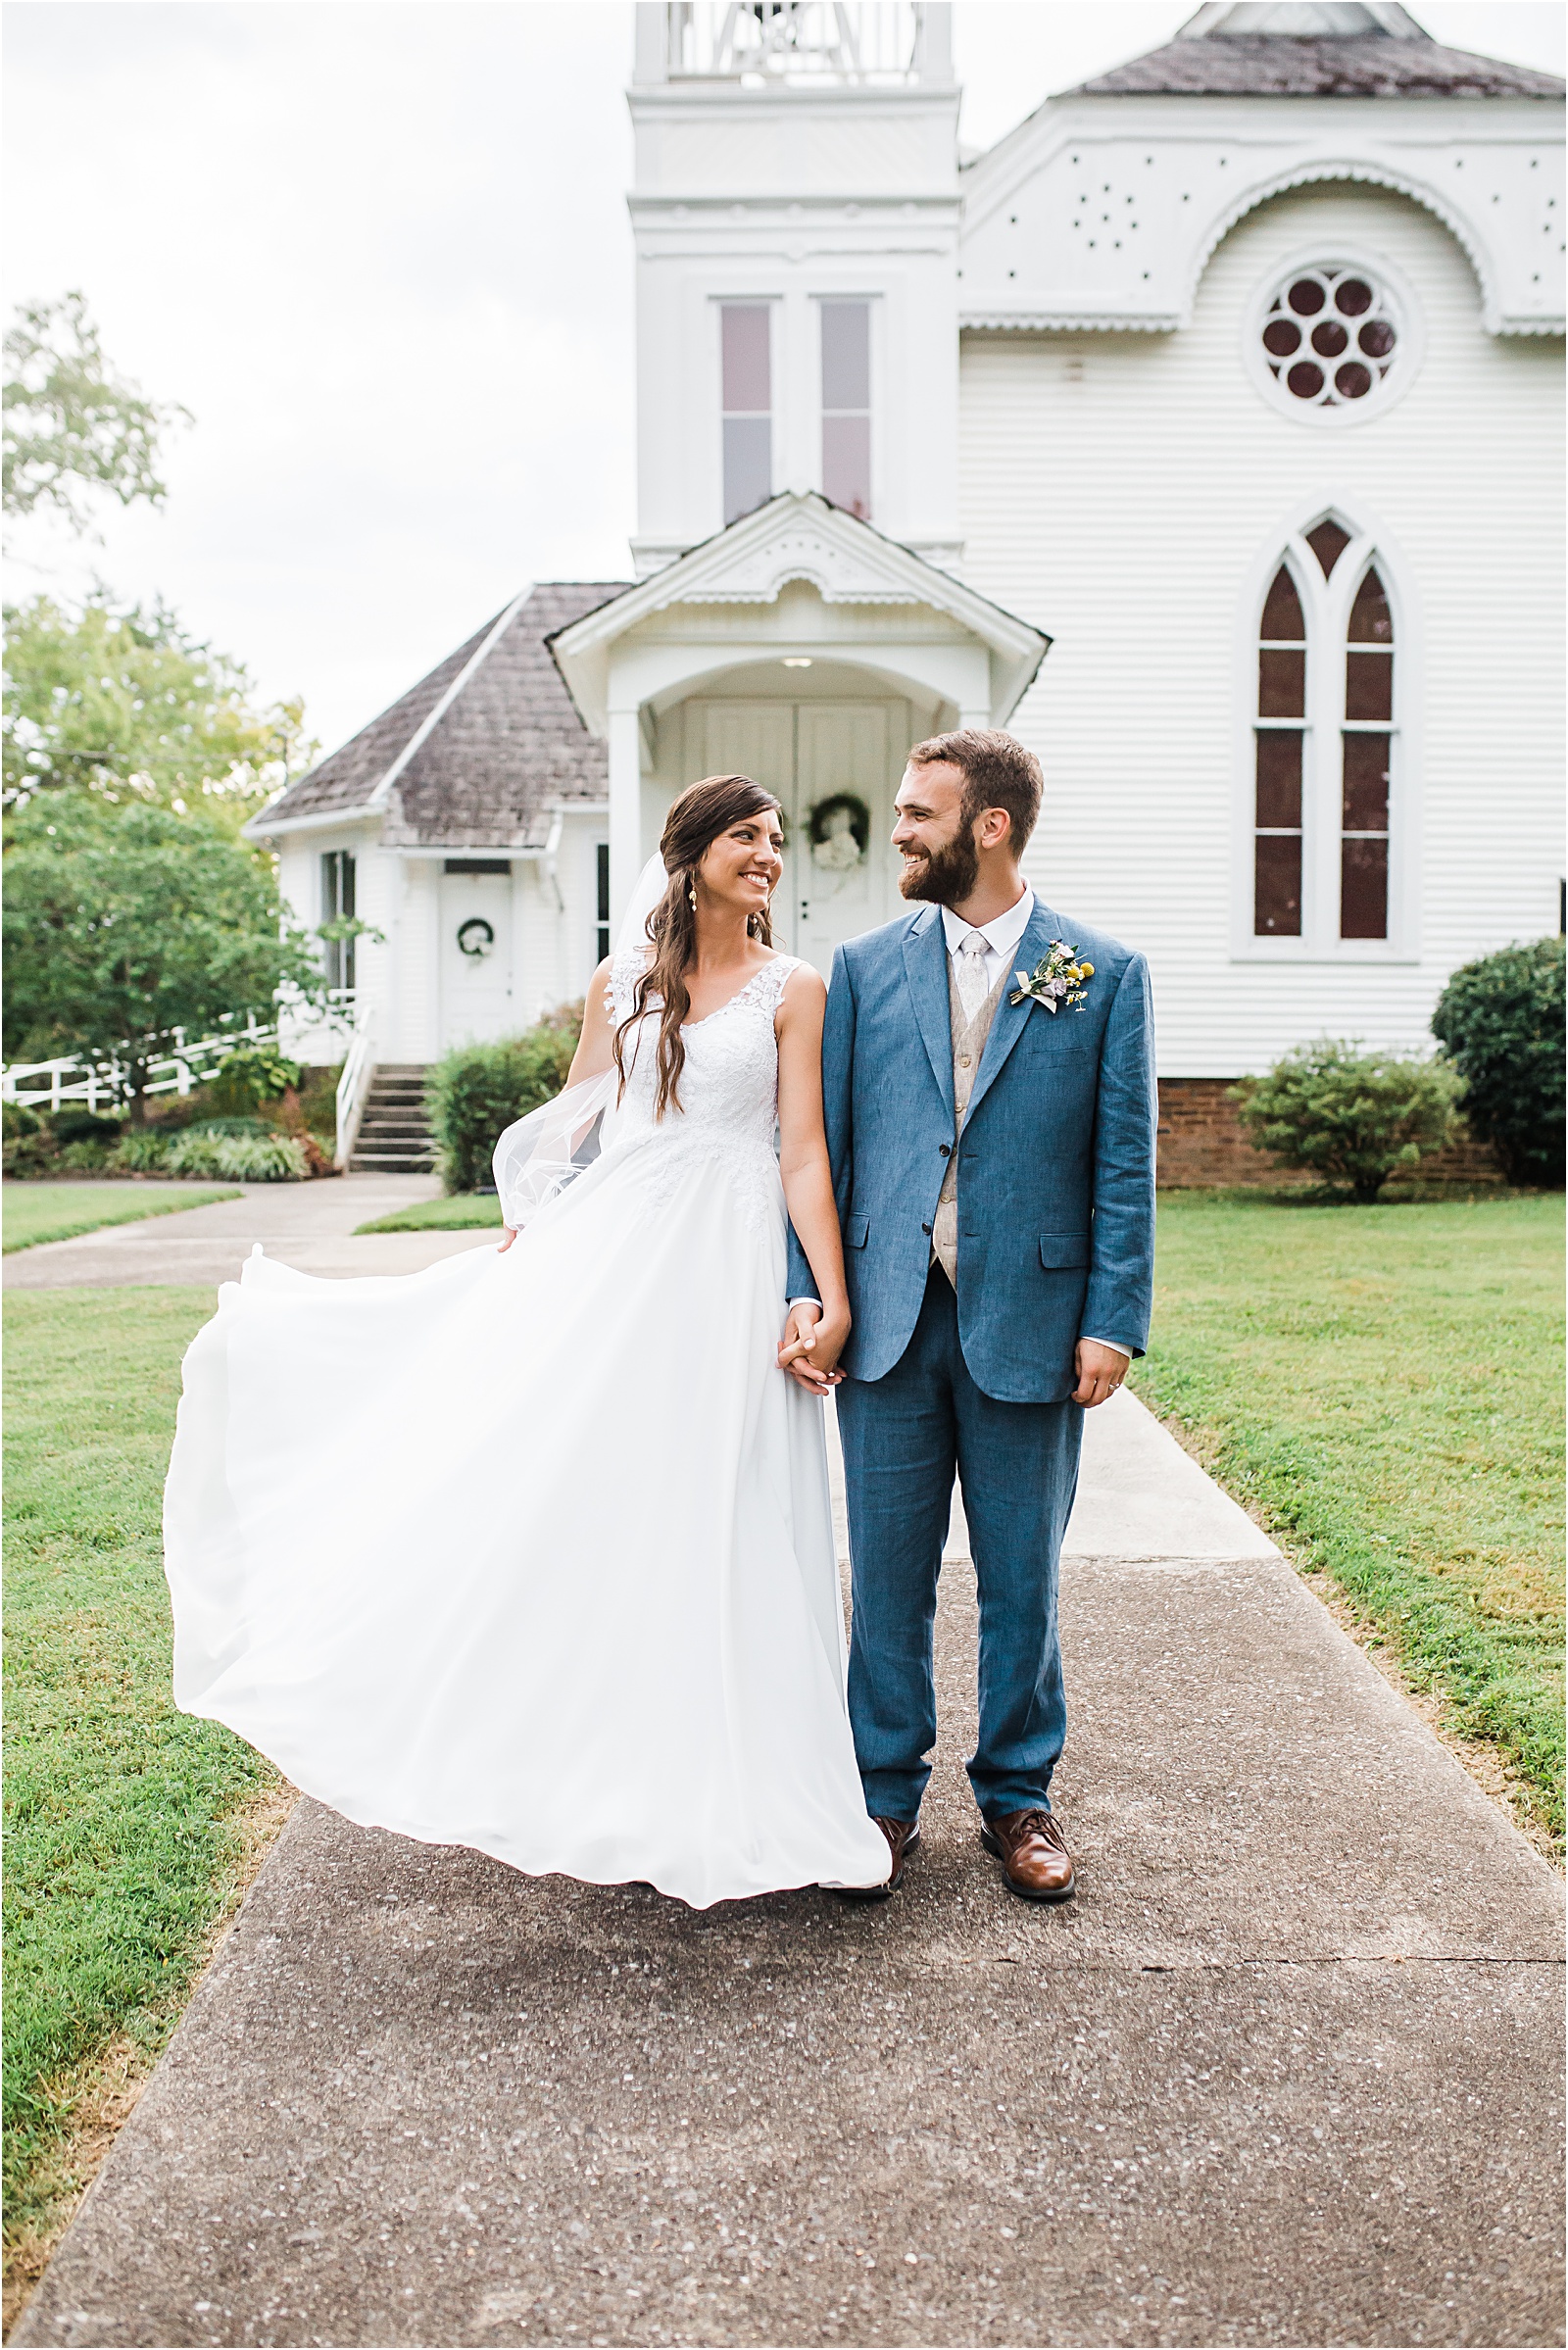 Amber Lowe Photo,Estate of Grace,Knoxville Wedding Photographer,Shannondale Church,